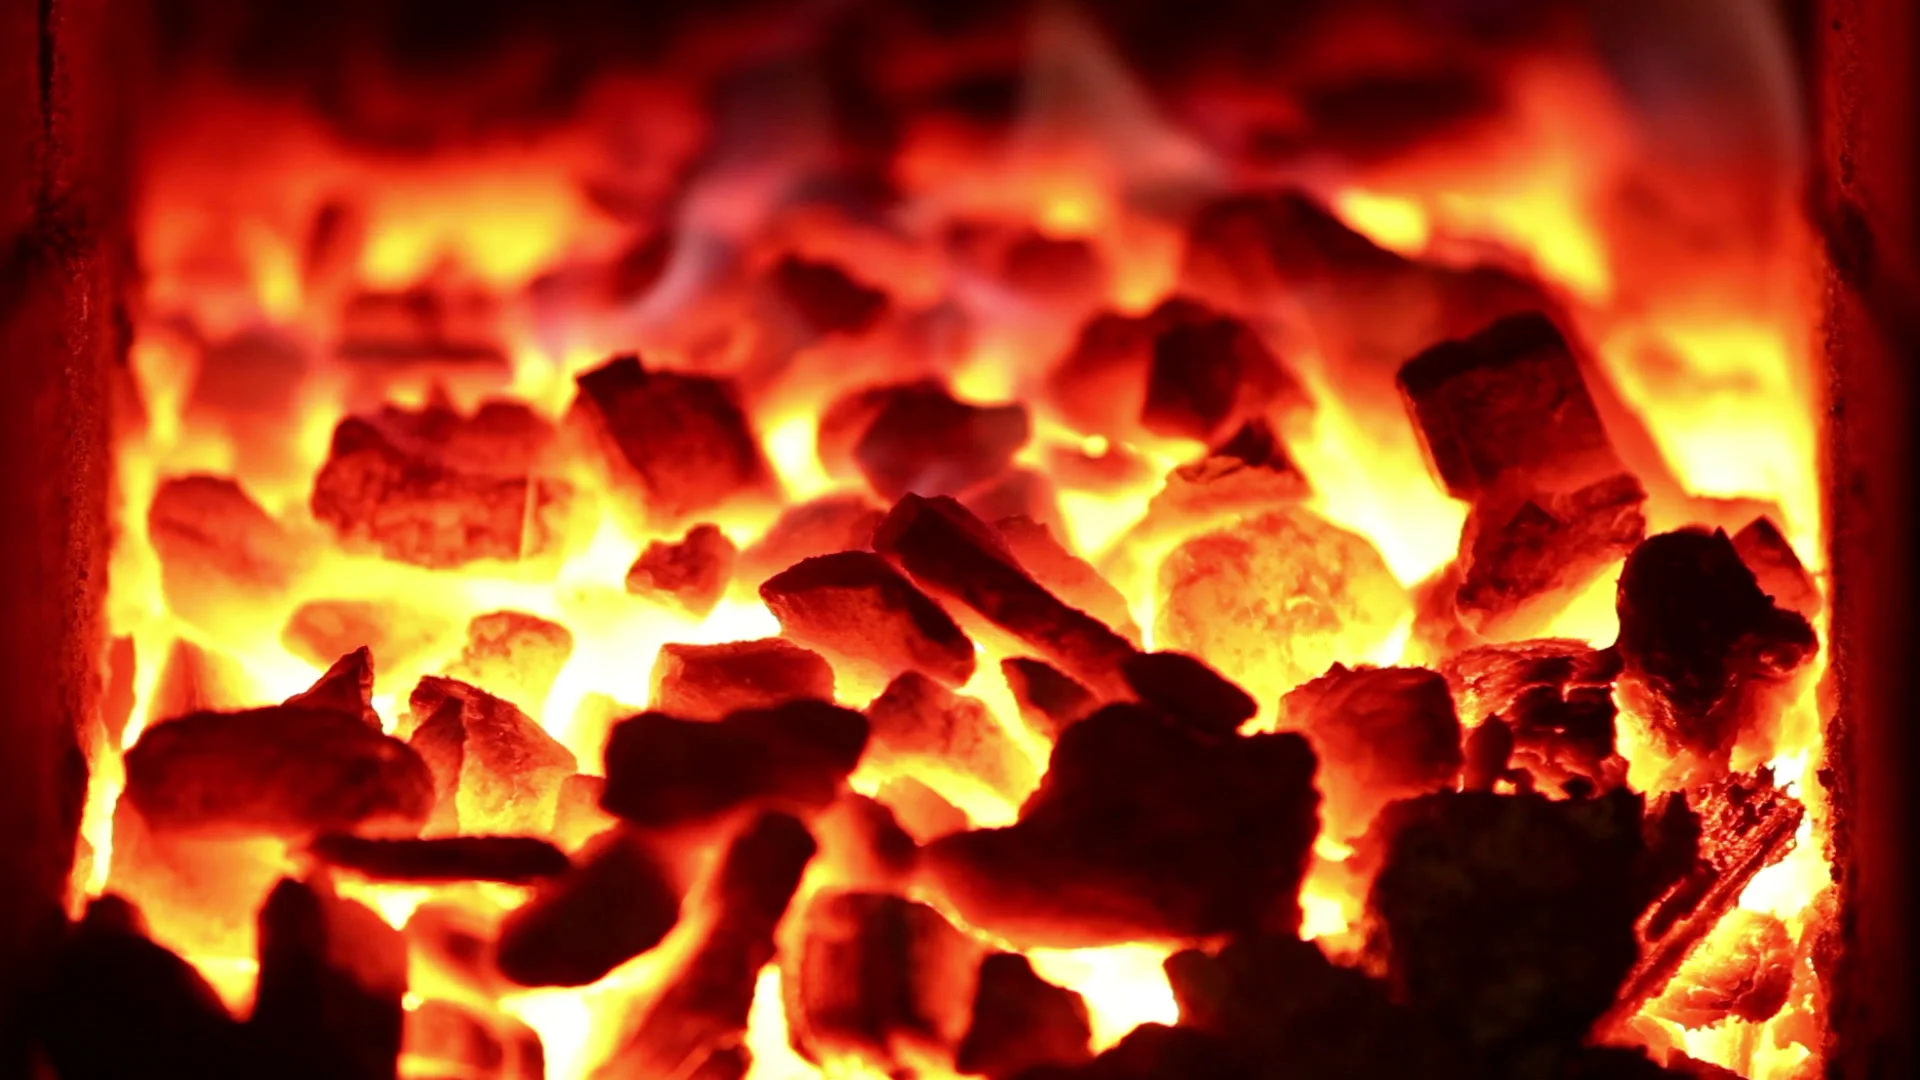 Explore Big K Smokeless Coal in our ultimate guide